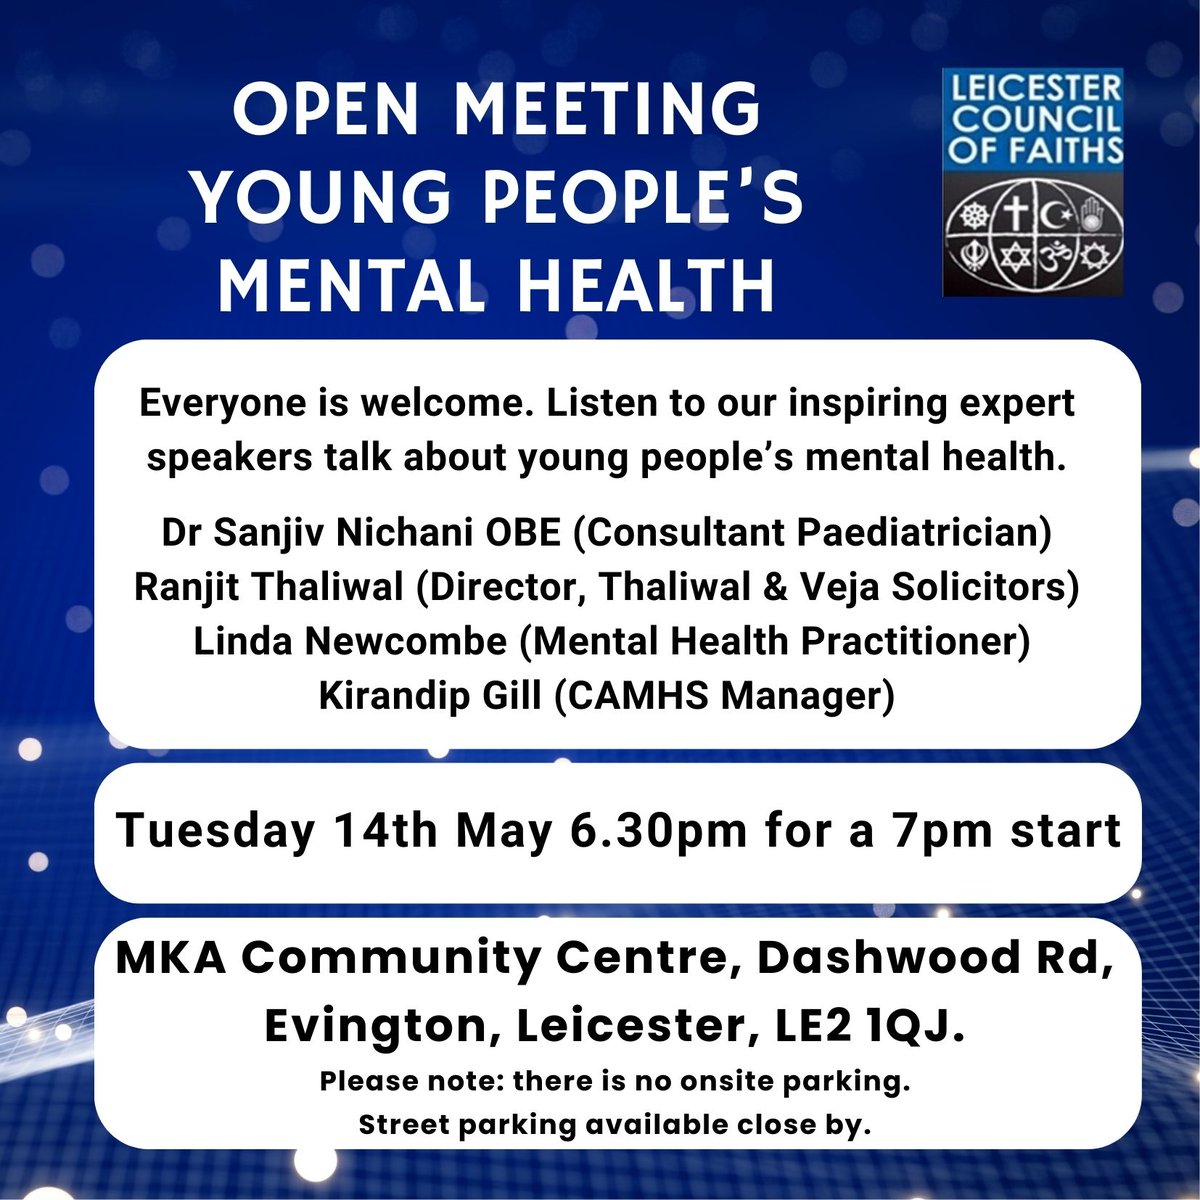 Please do come along to our next open meeting. Listen to expert speakers on young people's mental health and discuss the issues together.